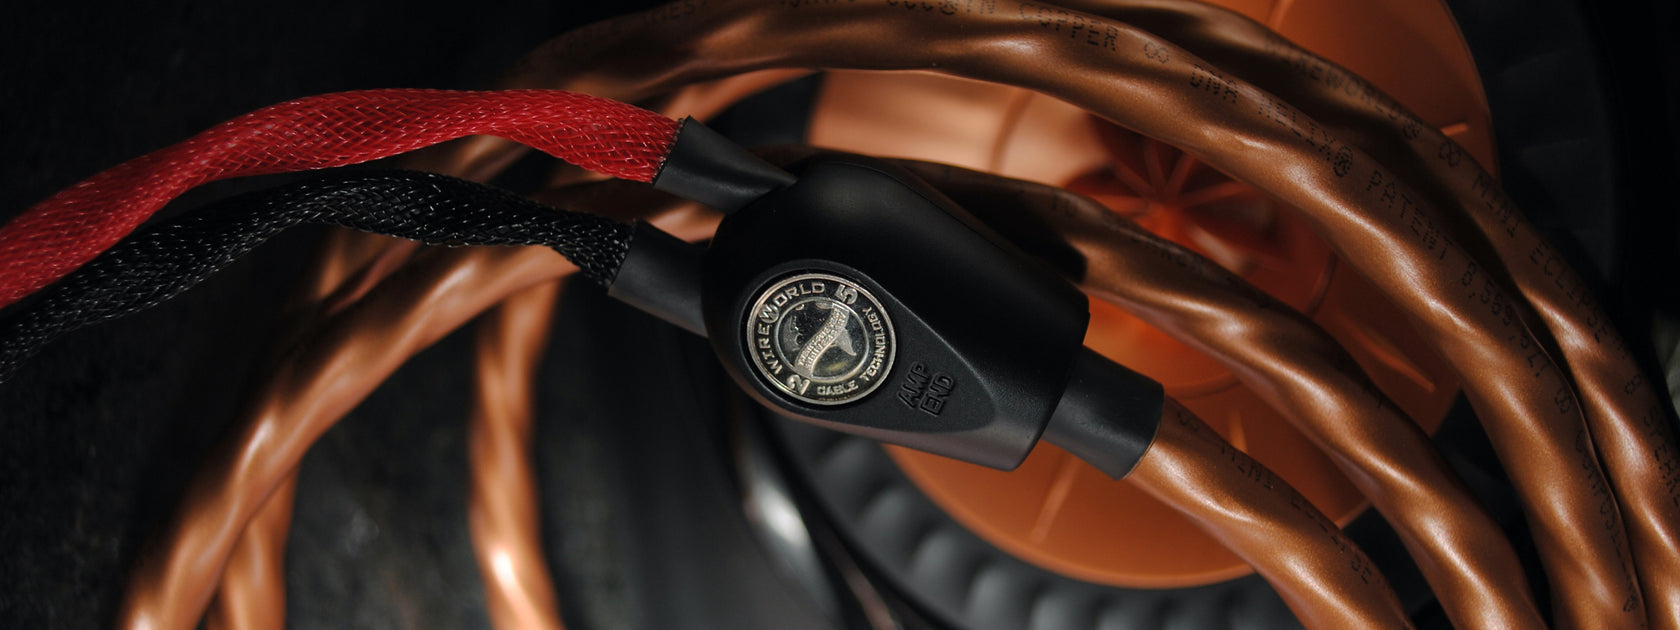 Award Winning, High End Cables, Audiophile